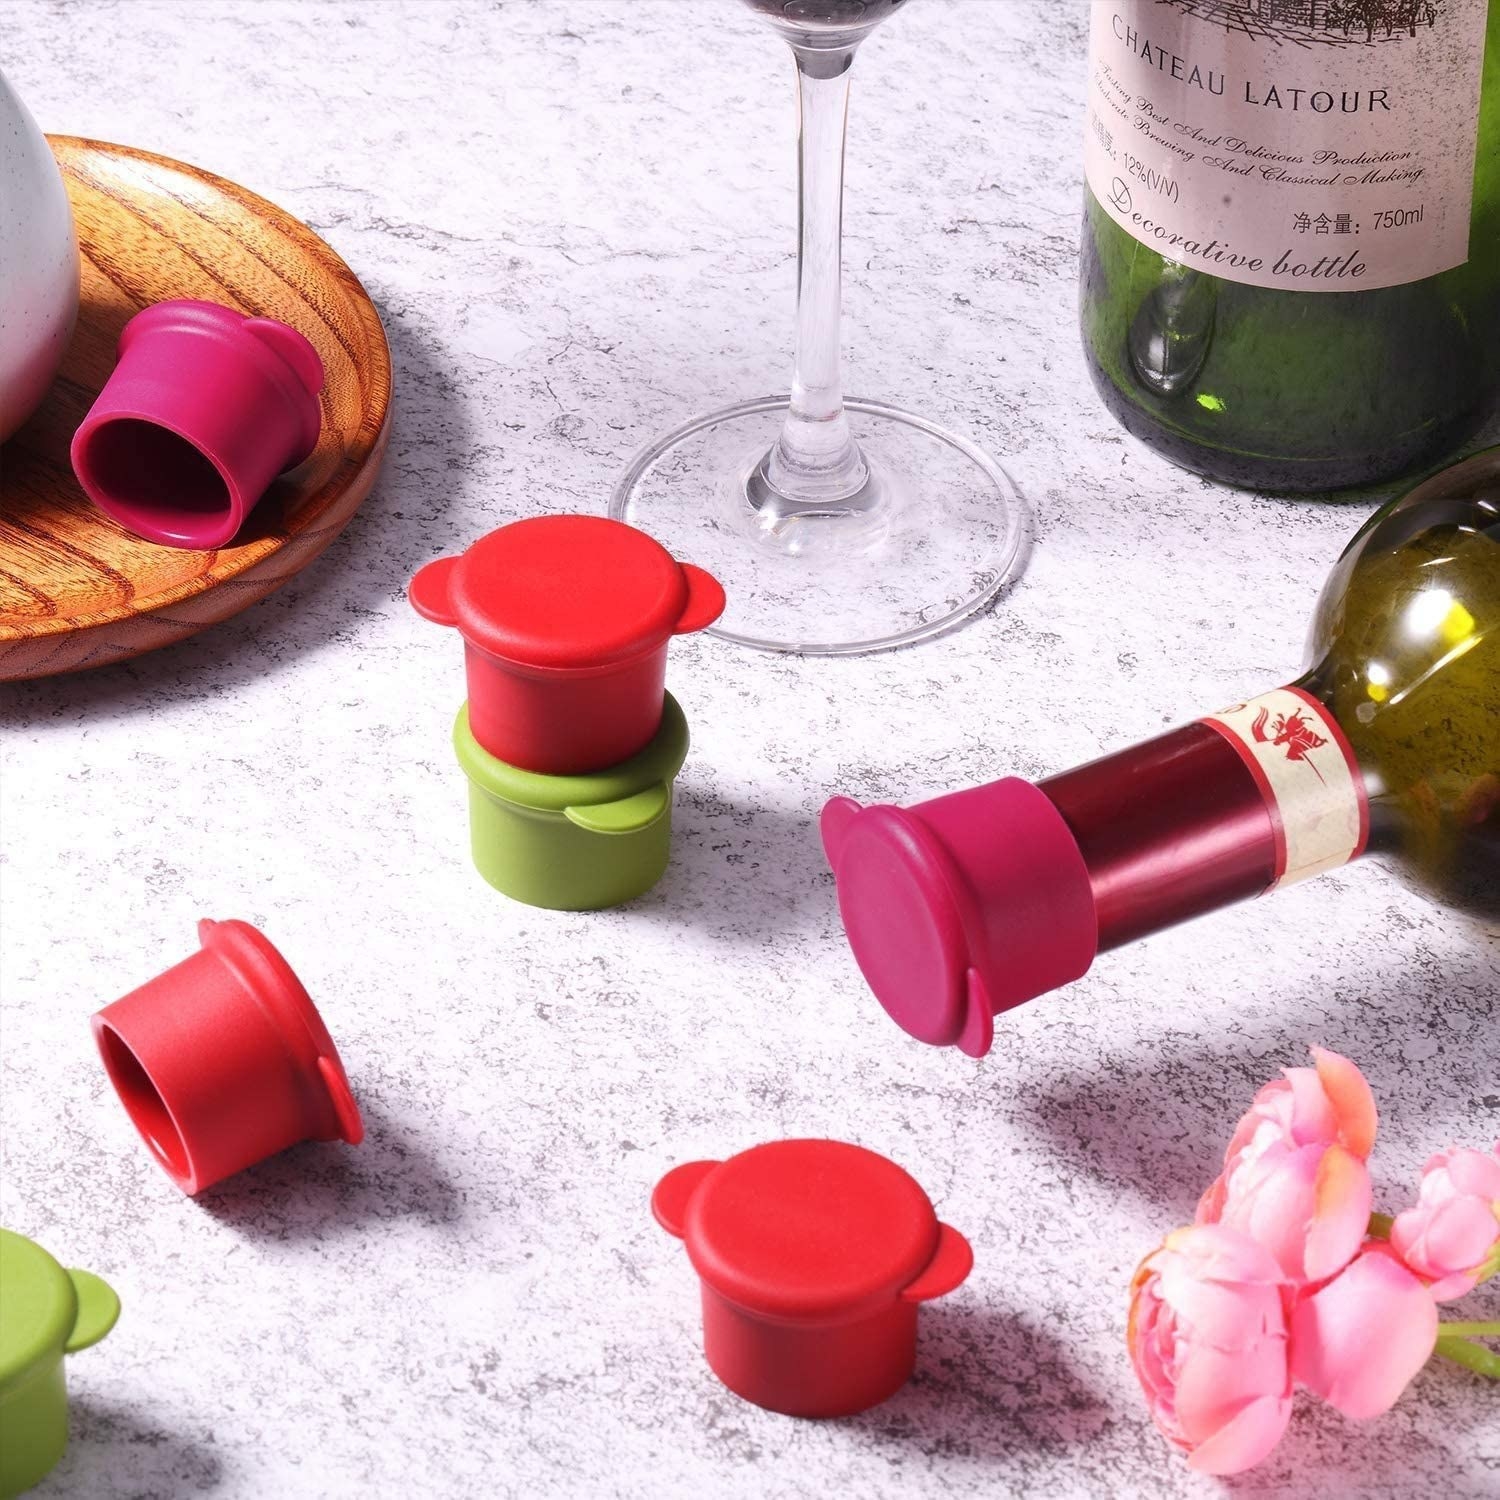 Several wine caps next to a bottle with a cap on it